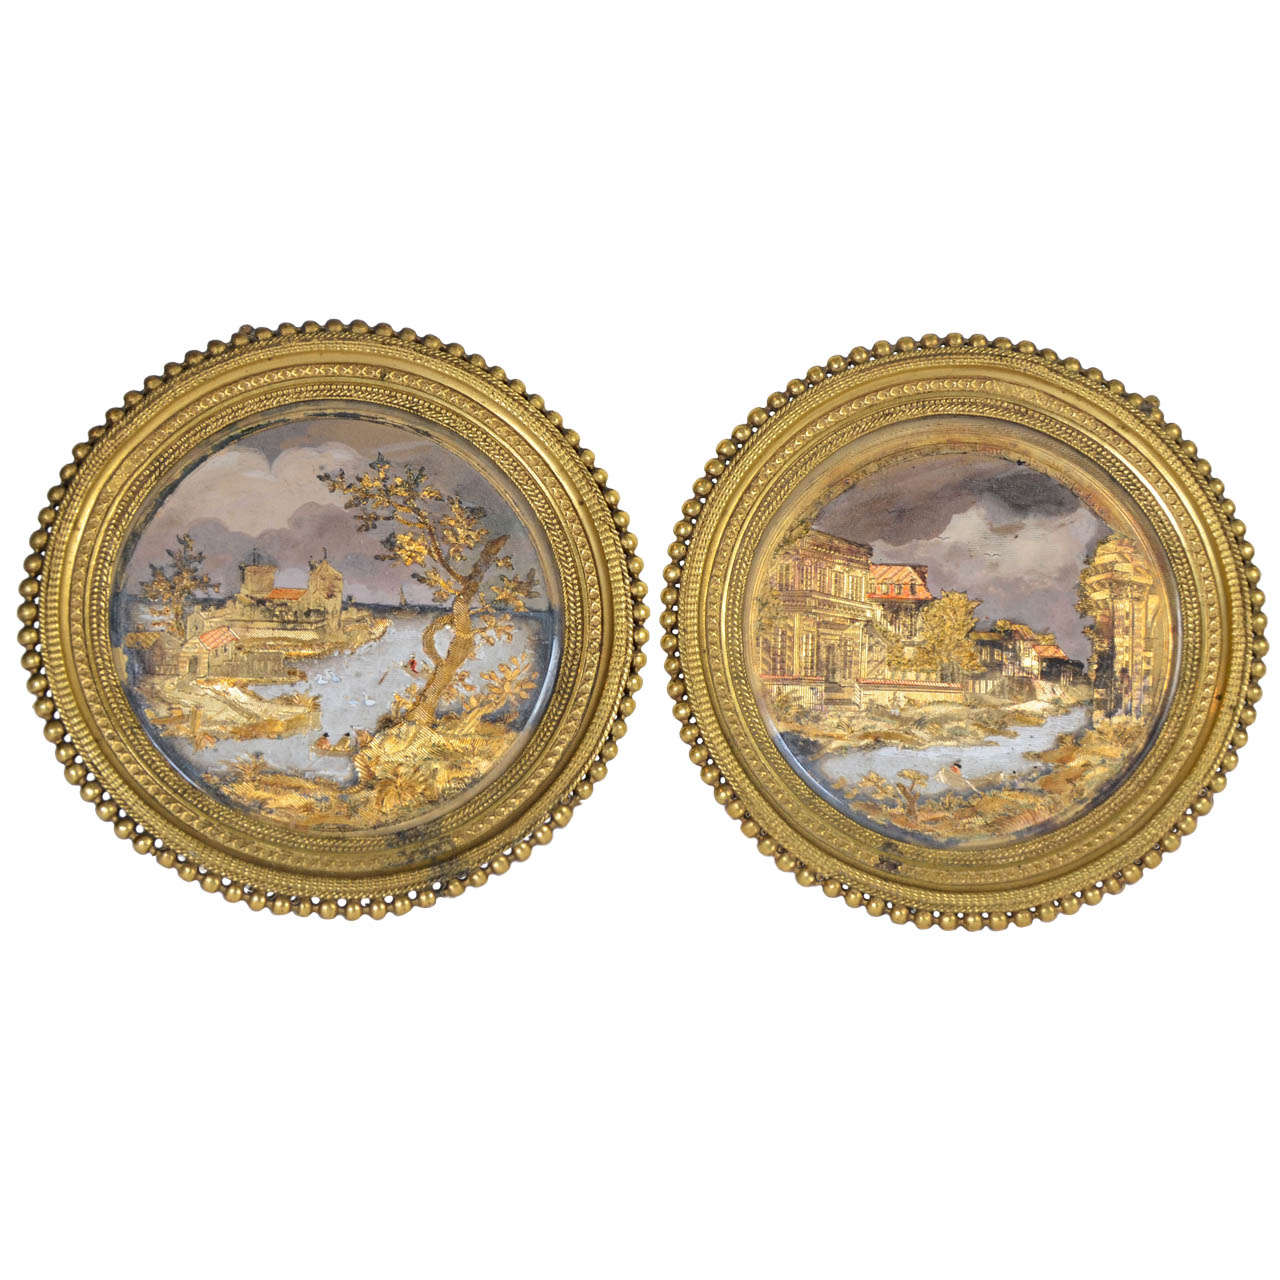 Pair of Medallions Attributed to Compigne